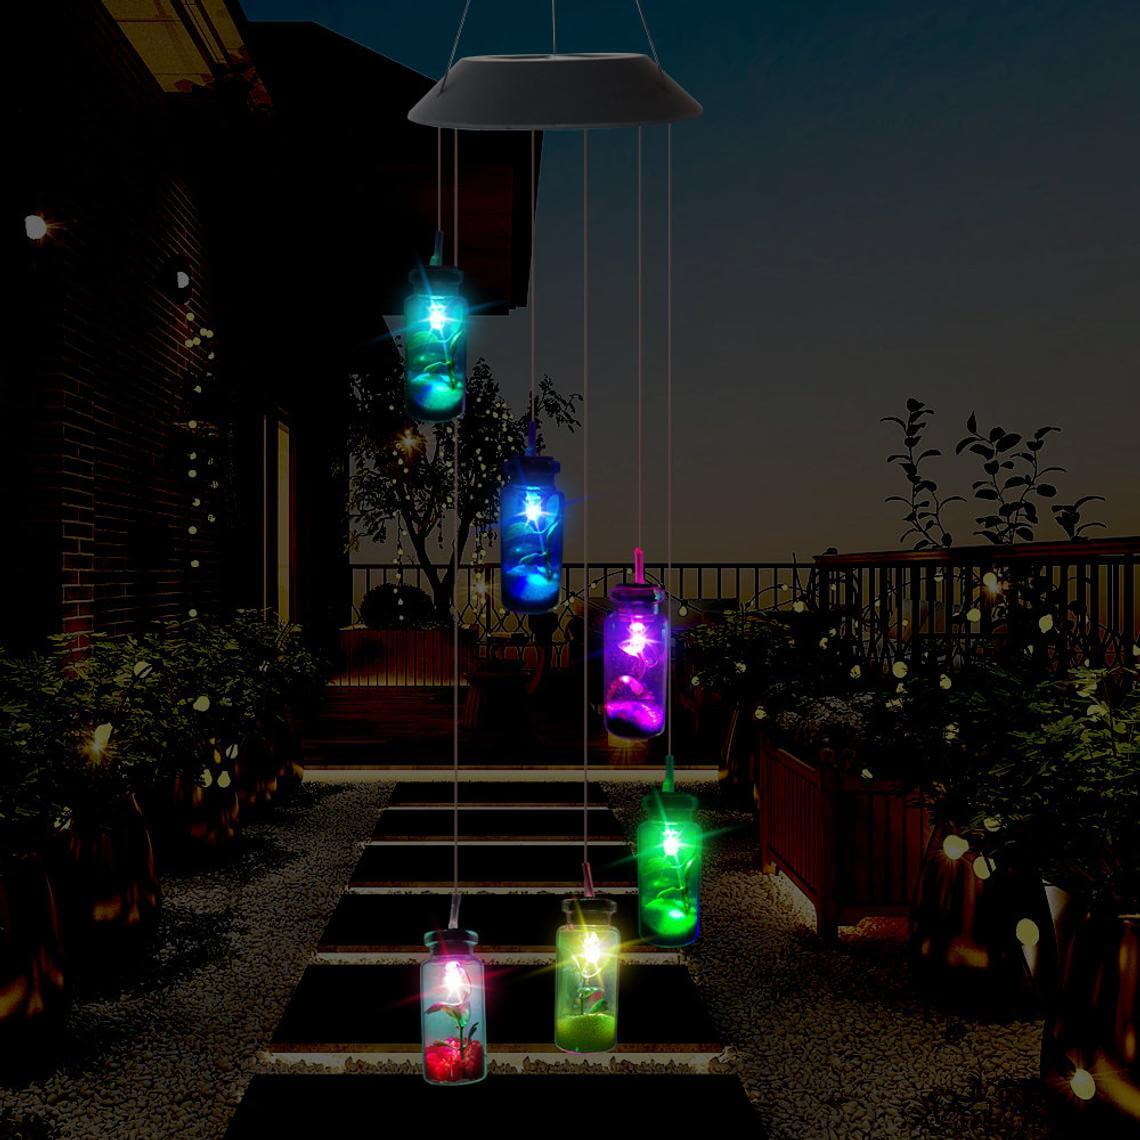 18+ Best Backyard Lighting Ideas and Designs for 18